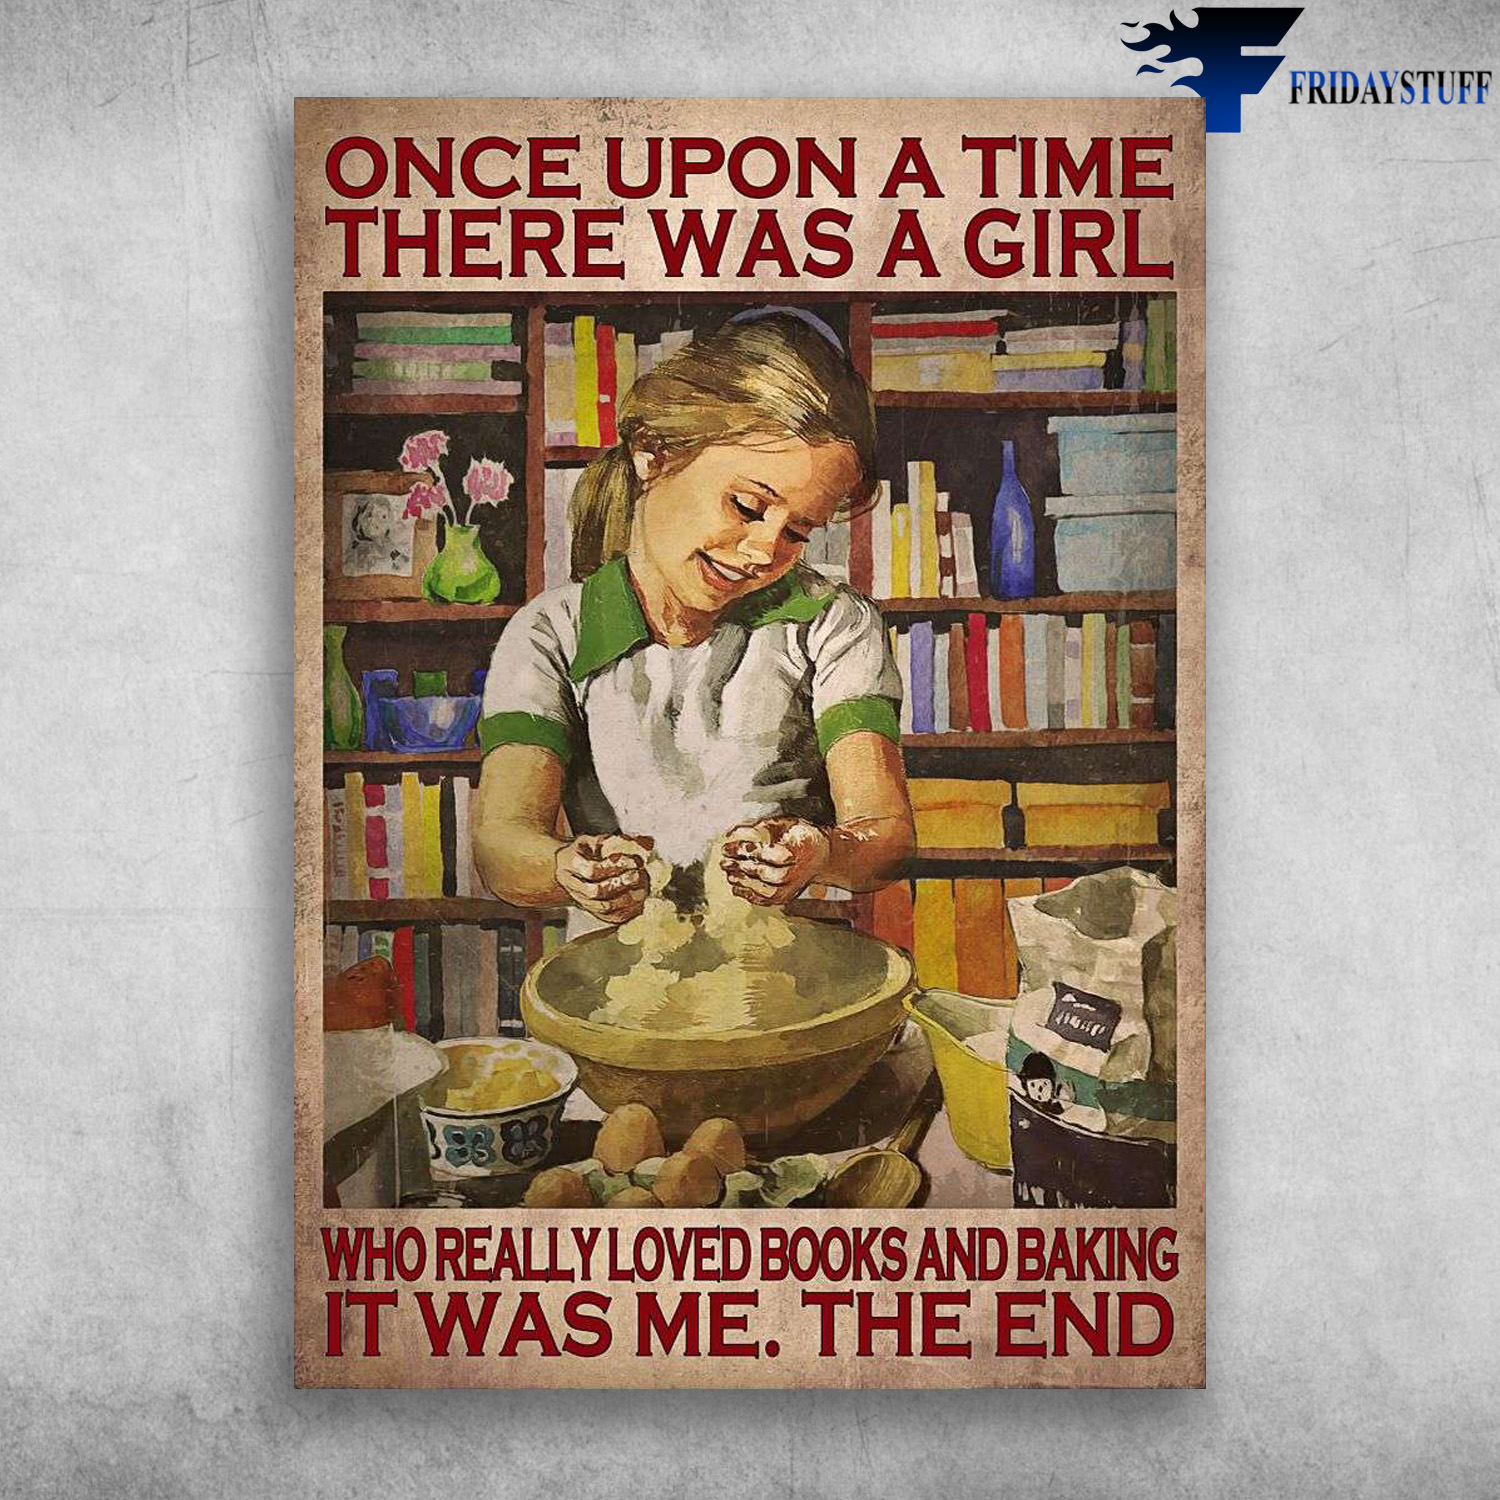 Little Girl Baking, Book Lover - Once Upon A Time, There Was A Girl, Who Really Loved Books And Baking, It Was Me, The End